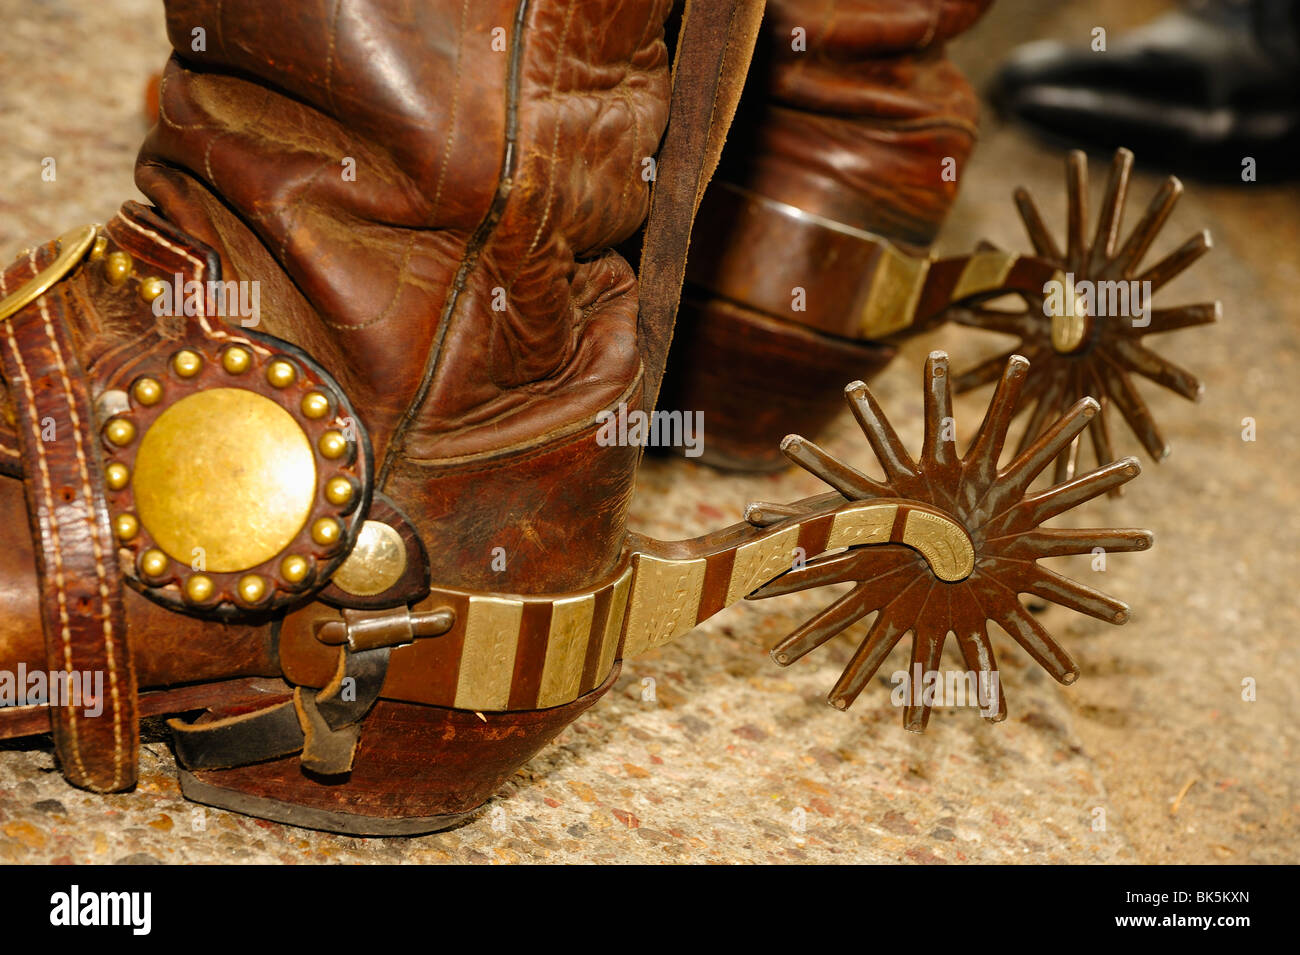 Western-style cowboy spurs on boots in Fort Worth, Texas Stock Photo